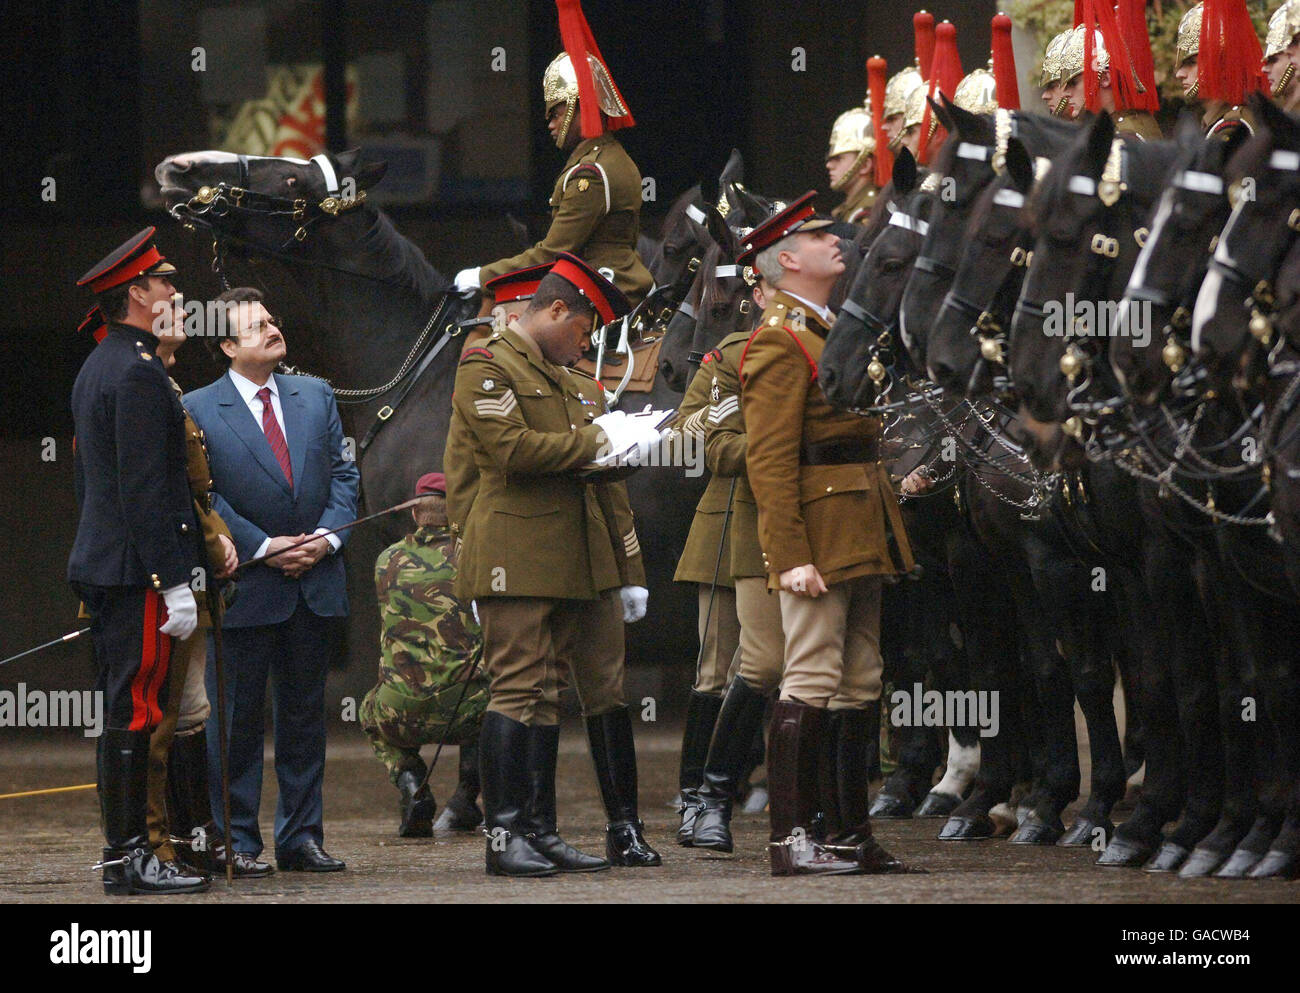 Lt Col Ralph Griffin LG Commanding Officer (right) joins Prince Mohammed bin Nawaf bin Abdul Aziz Al-Saud, the Saudi Arabian Ambassador to the UK, during a visit to the Household Cavalry Mounted Regiment ahead of the King of Saudi Arabia's state visit next week, at Hyde Park Barracks, London. Stock Photo